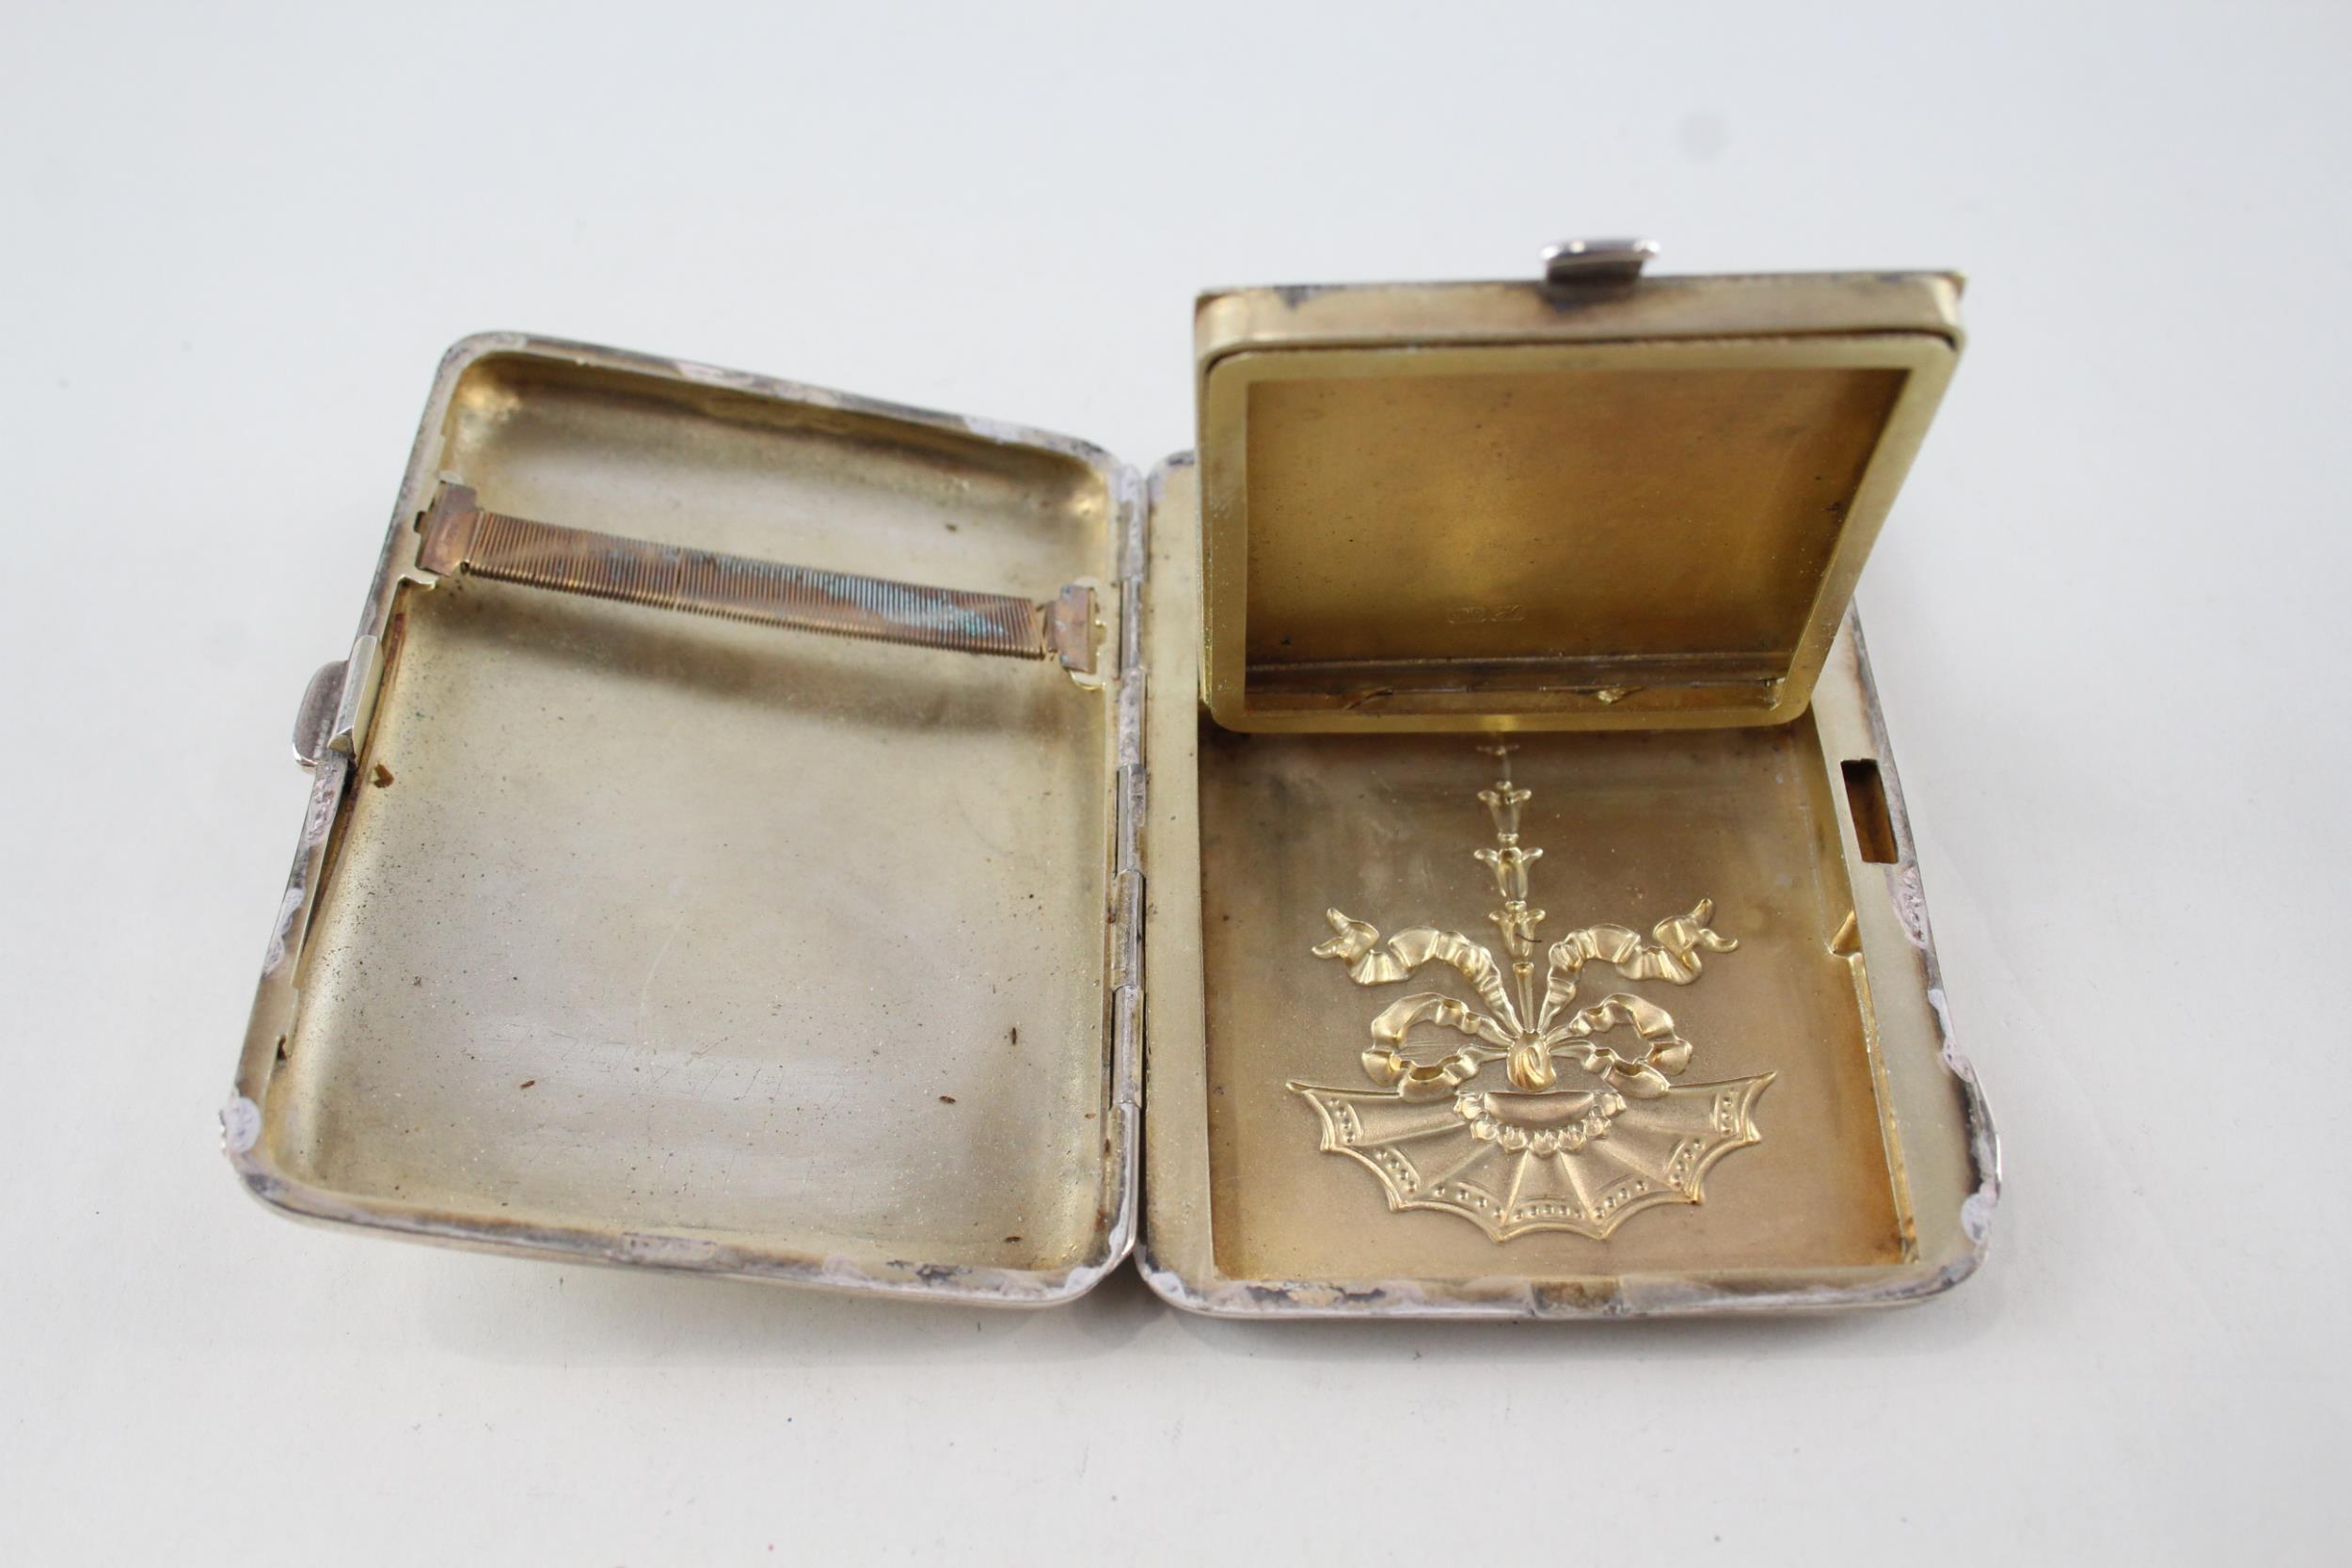 Edwardian 1908 Chester Sterling Silver Ladies Compact / Cigarette Case (125g) - Maker - William - Image 4 of 5